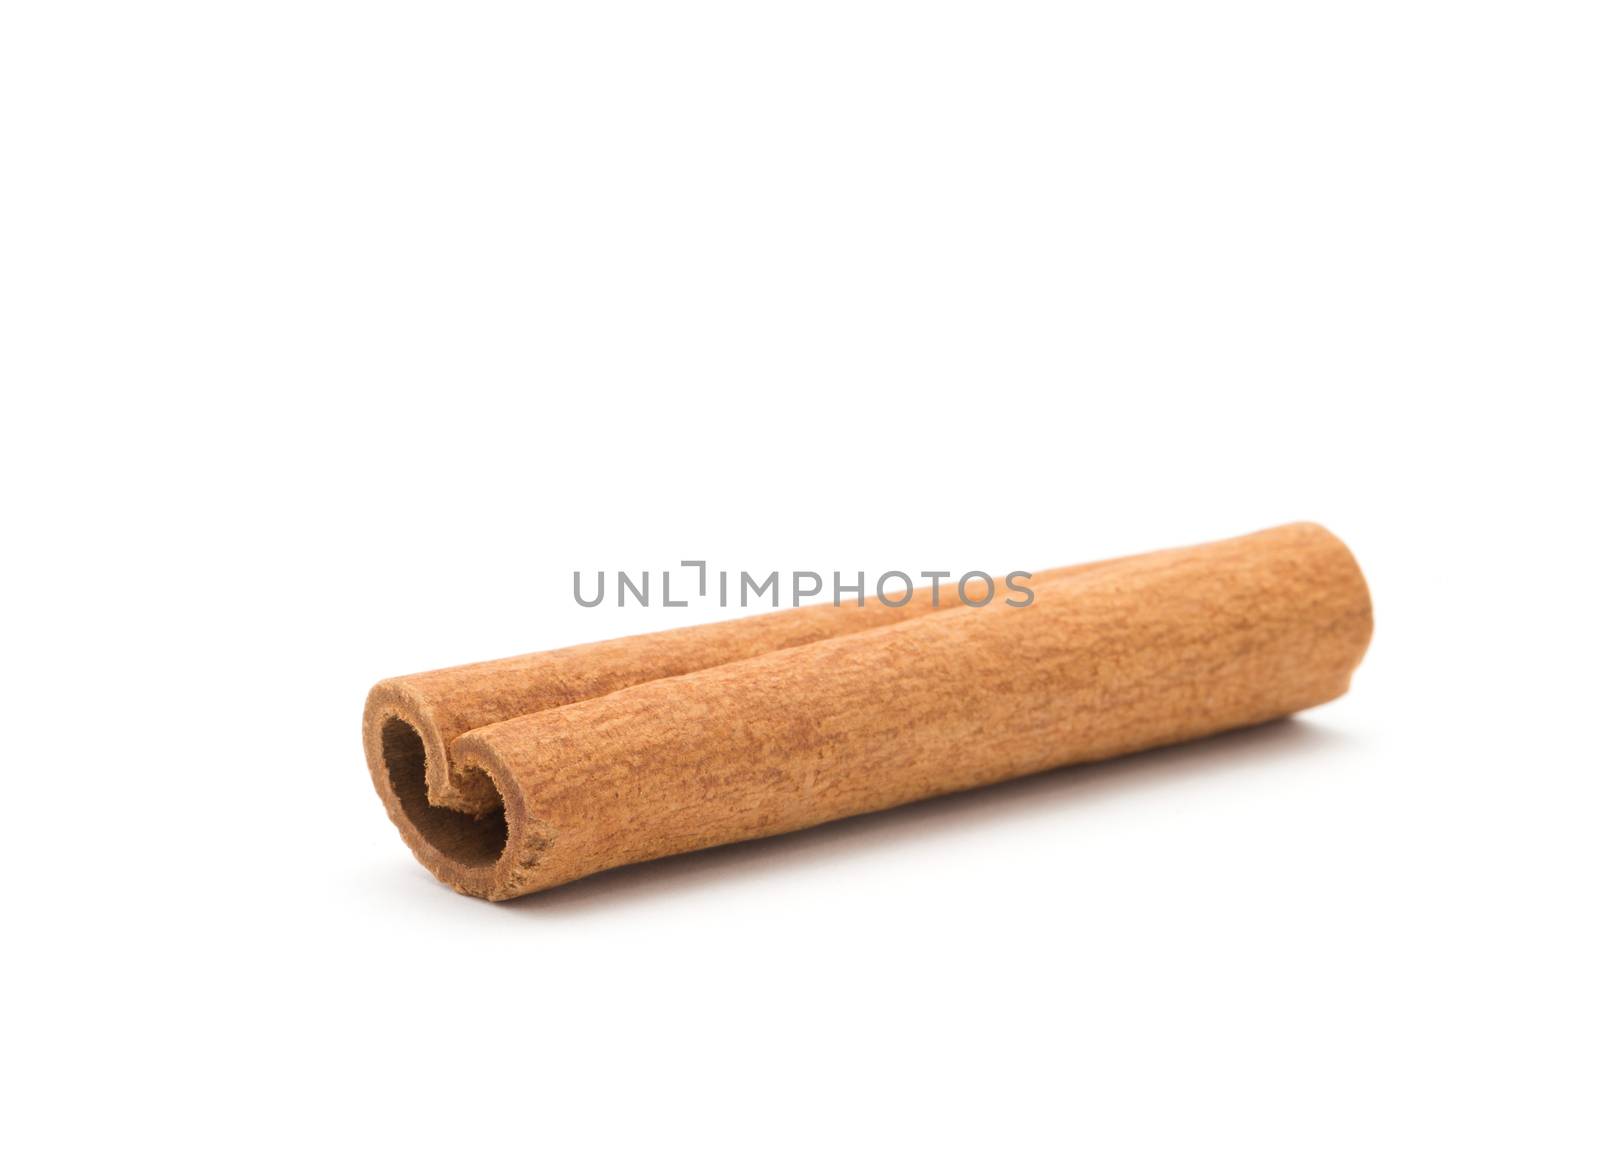 cinnamon isolated on white background